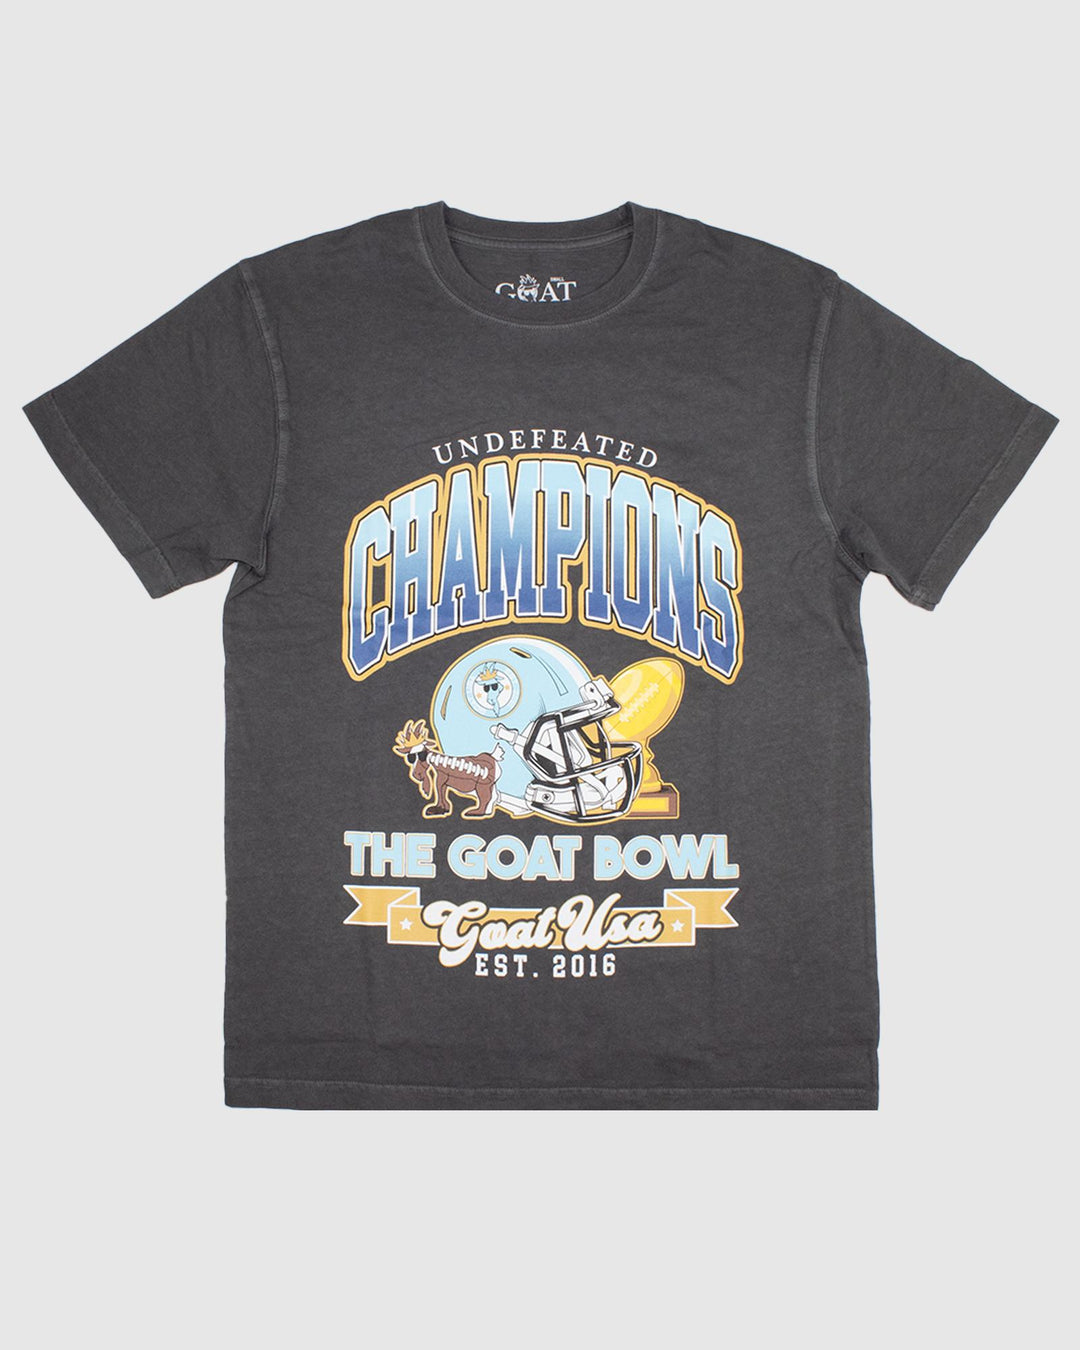 Pepper colored t-shirt that reads 'Undefeated Champions' with football helmet and trophy